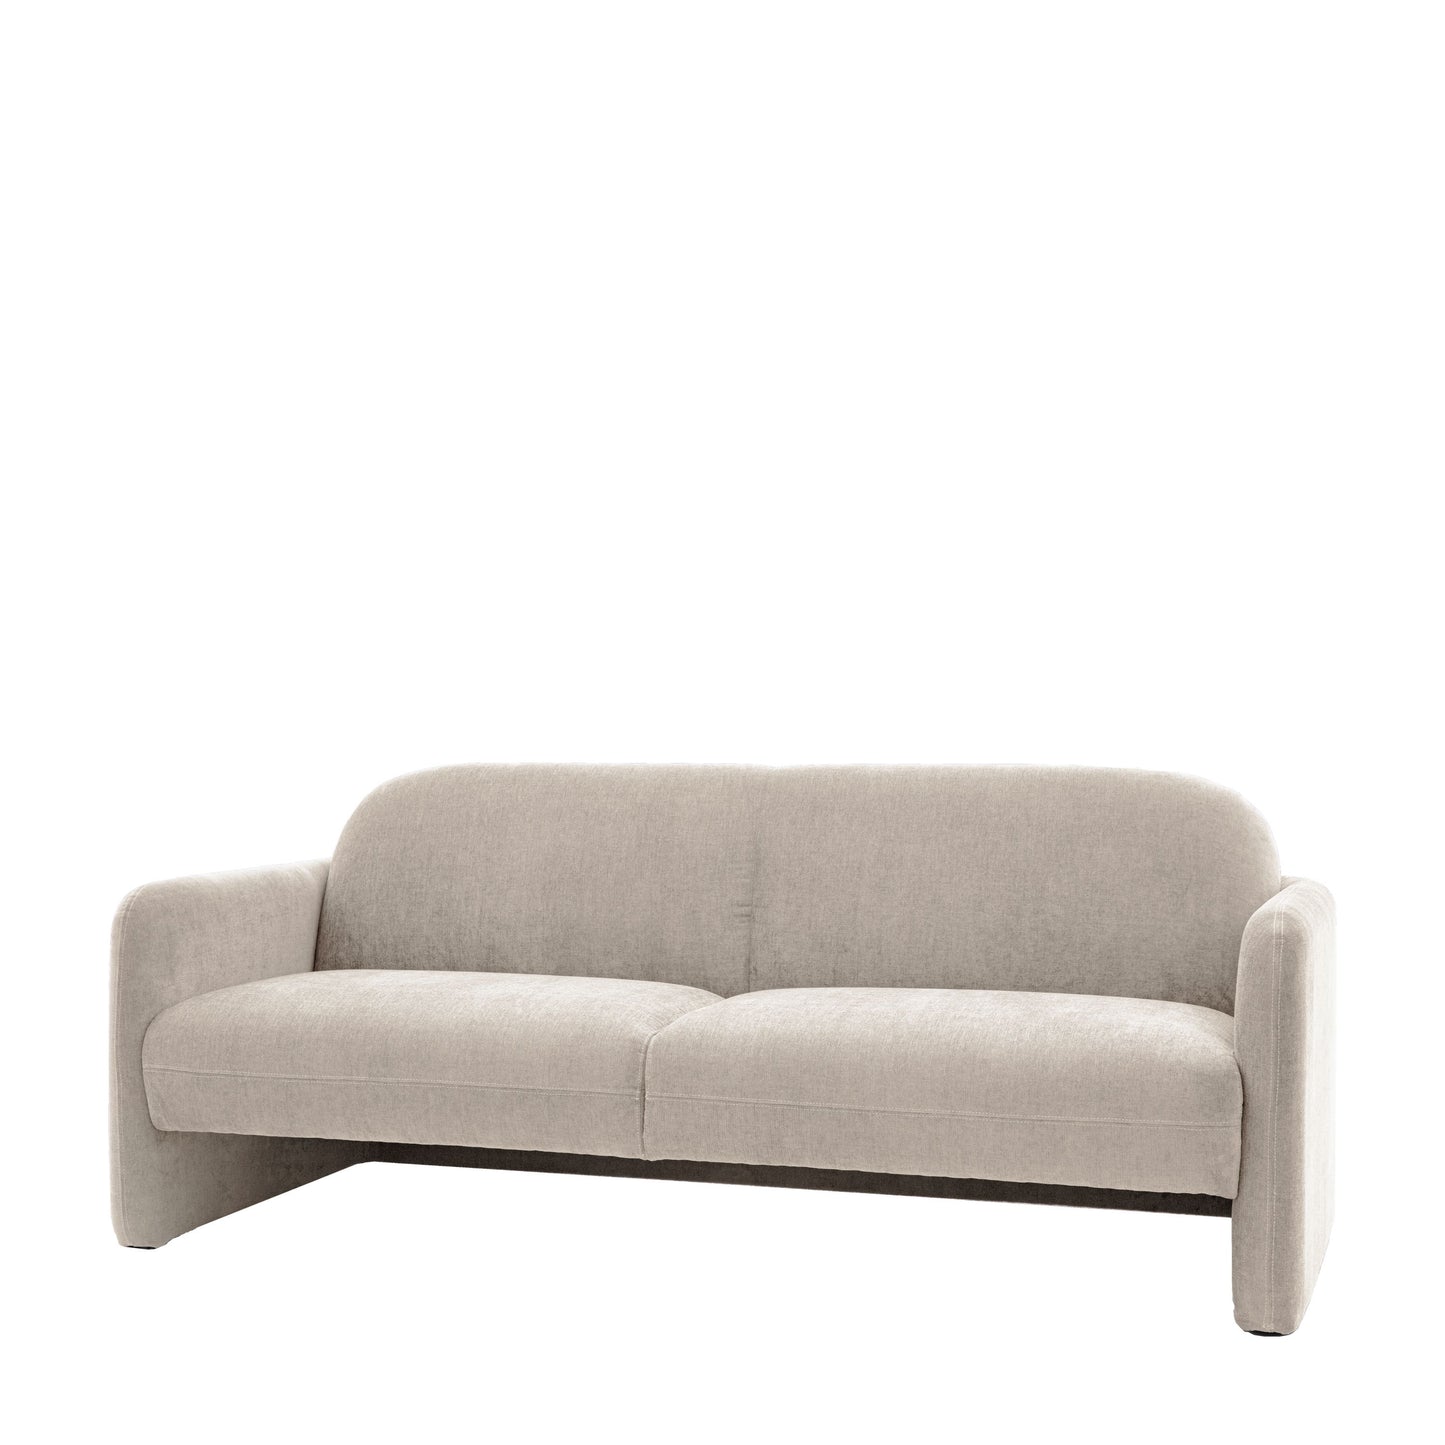 Blythe 3 Seater Sofa in Stone Beige